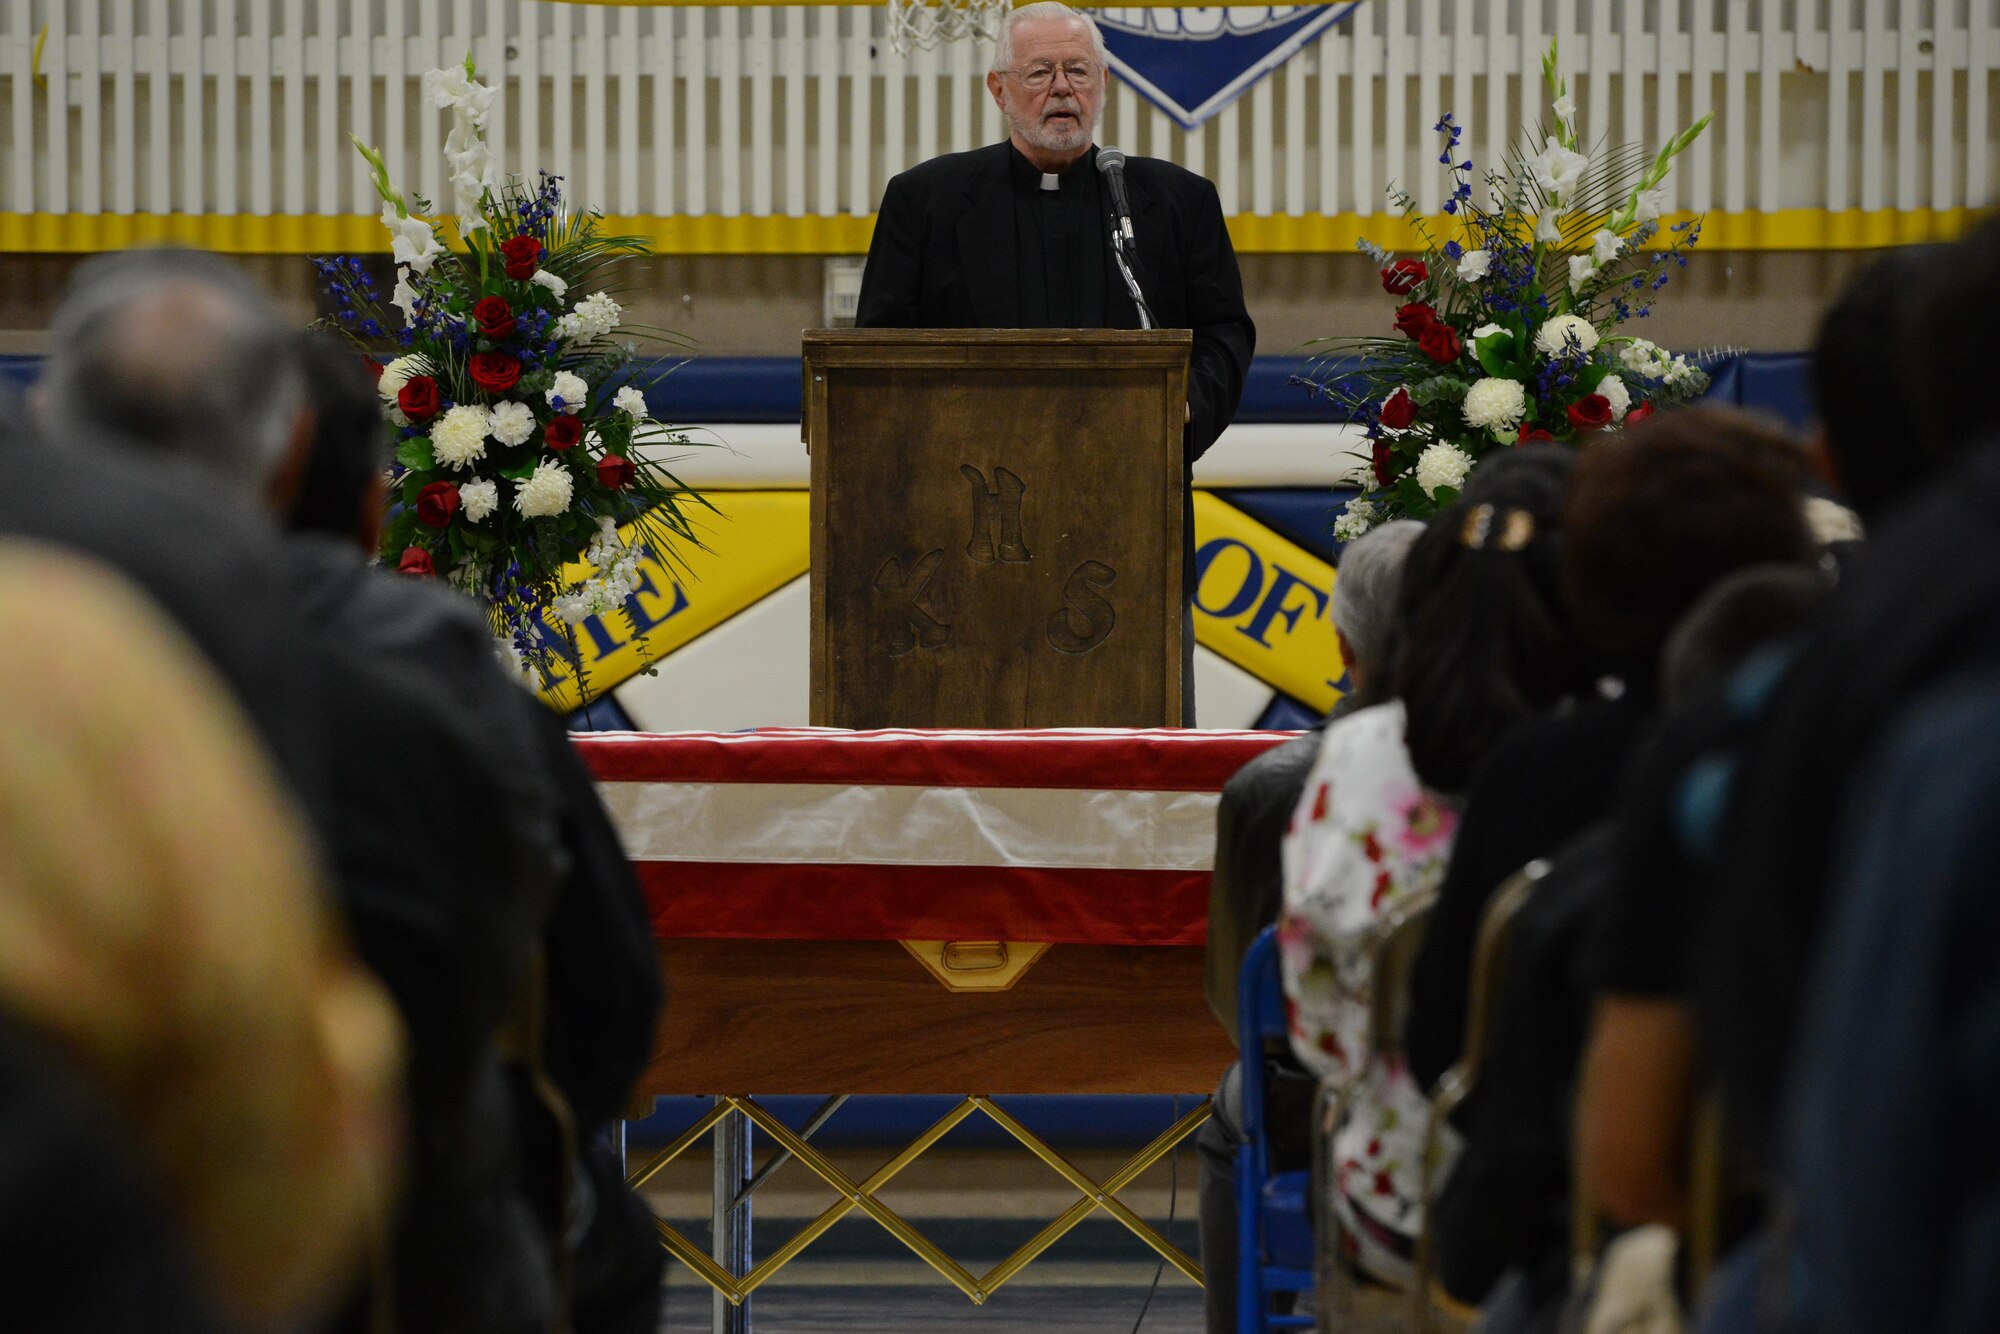 Father John Hinsvark speaks during the memorial service of former Alaska Adjutant General Maj. Gen. John Schaeffer Jr, at Kotzebue, Alaska, Aug. 31, 2016. Schaeffer enlisted in the Alaska National Guard in 1957, and served for 34 years.  Schaeffer was the first Alaska Native two-star general of the Alaska National Guard and commissioner of the Alaska Department of Military and Veterans Affairs. He is survived by Mary his wife of 56 years. (U.S. Air Force photo by Airman 1st Class Javier Alvarez)